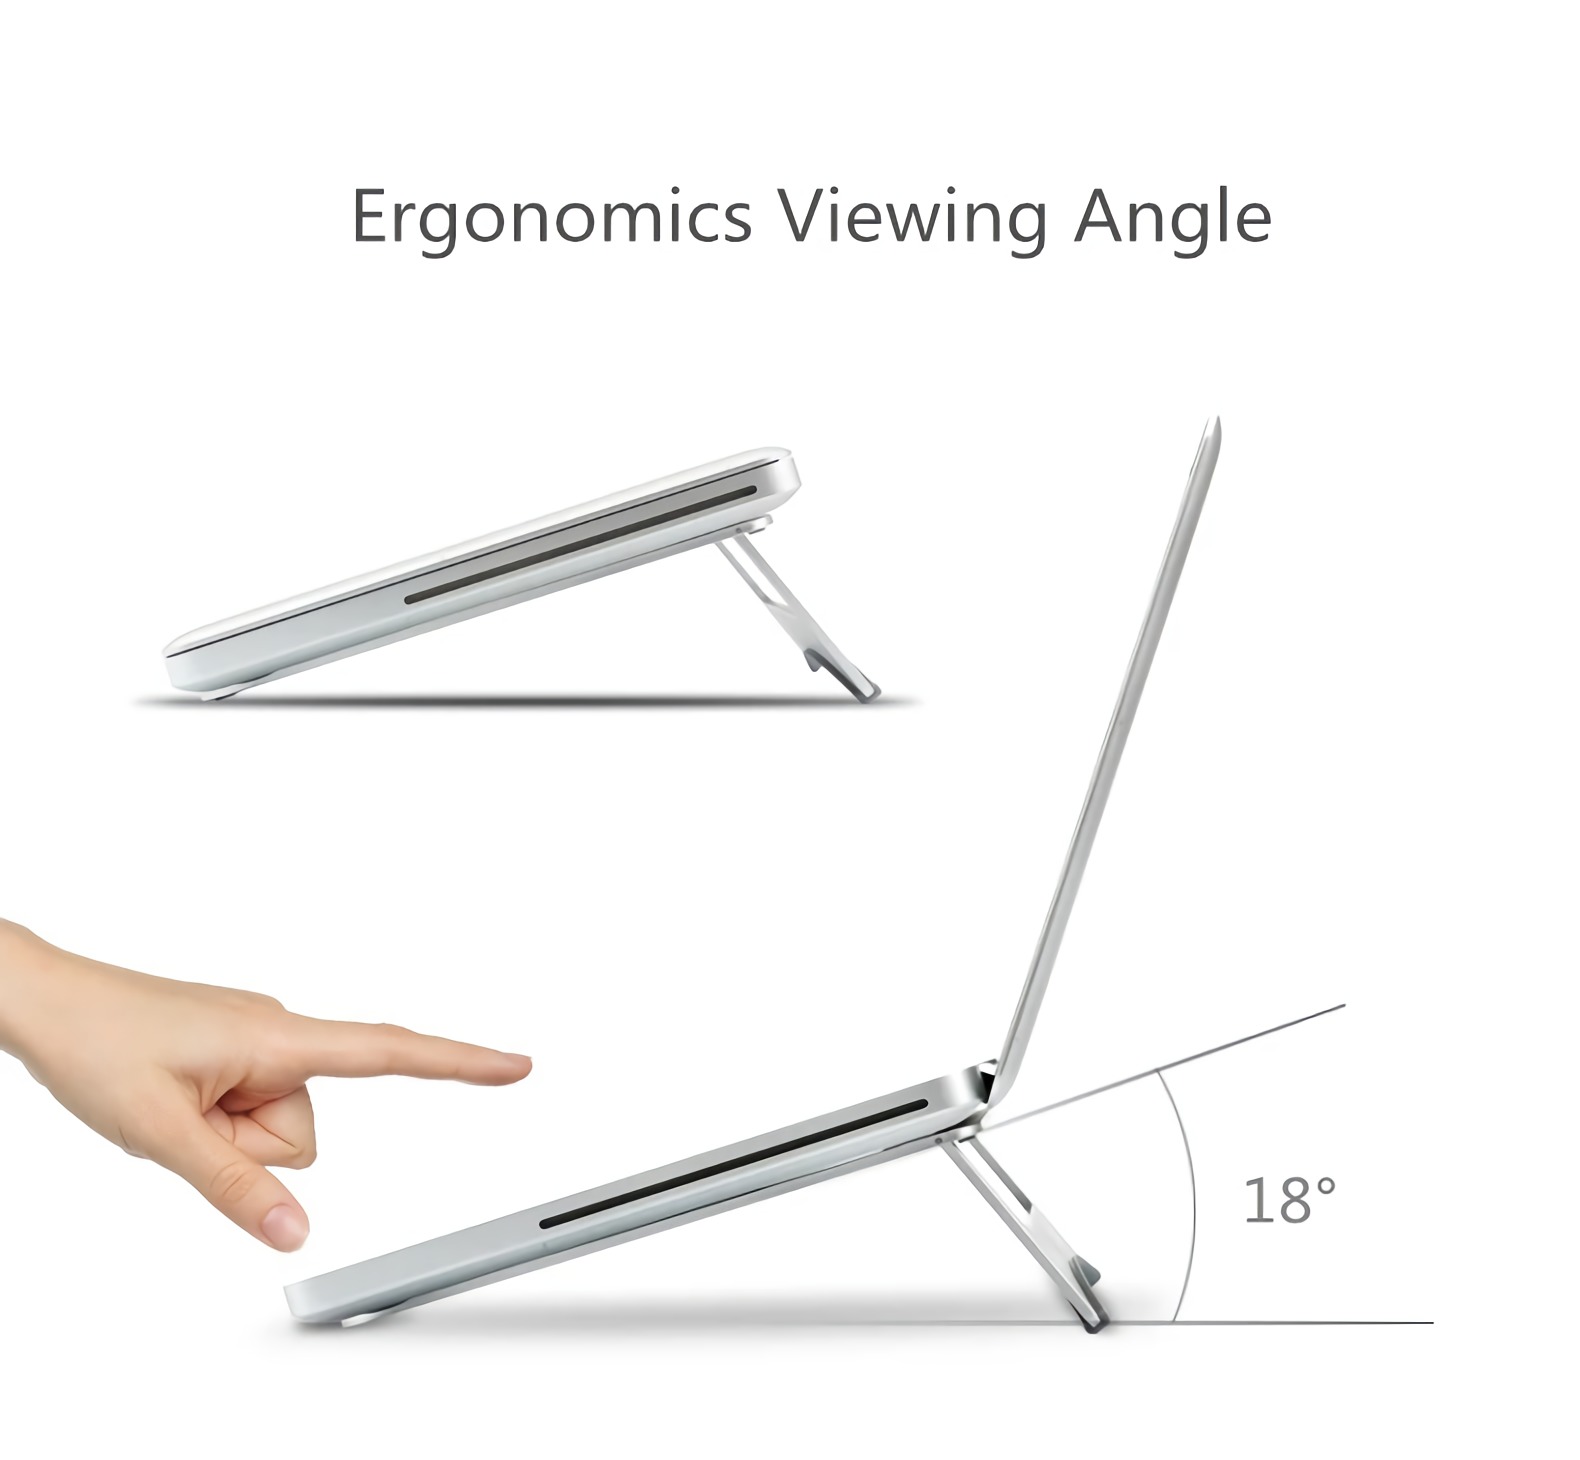 High Quality Portable Laptop Stand Aluminium Alloy For MacBook Tablet Holder With Cooling Function